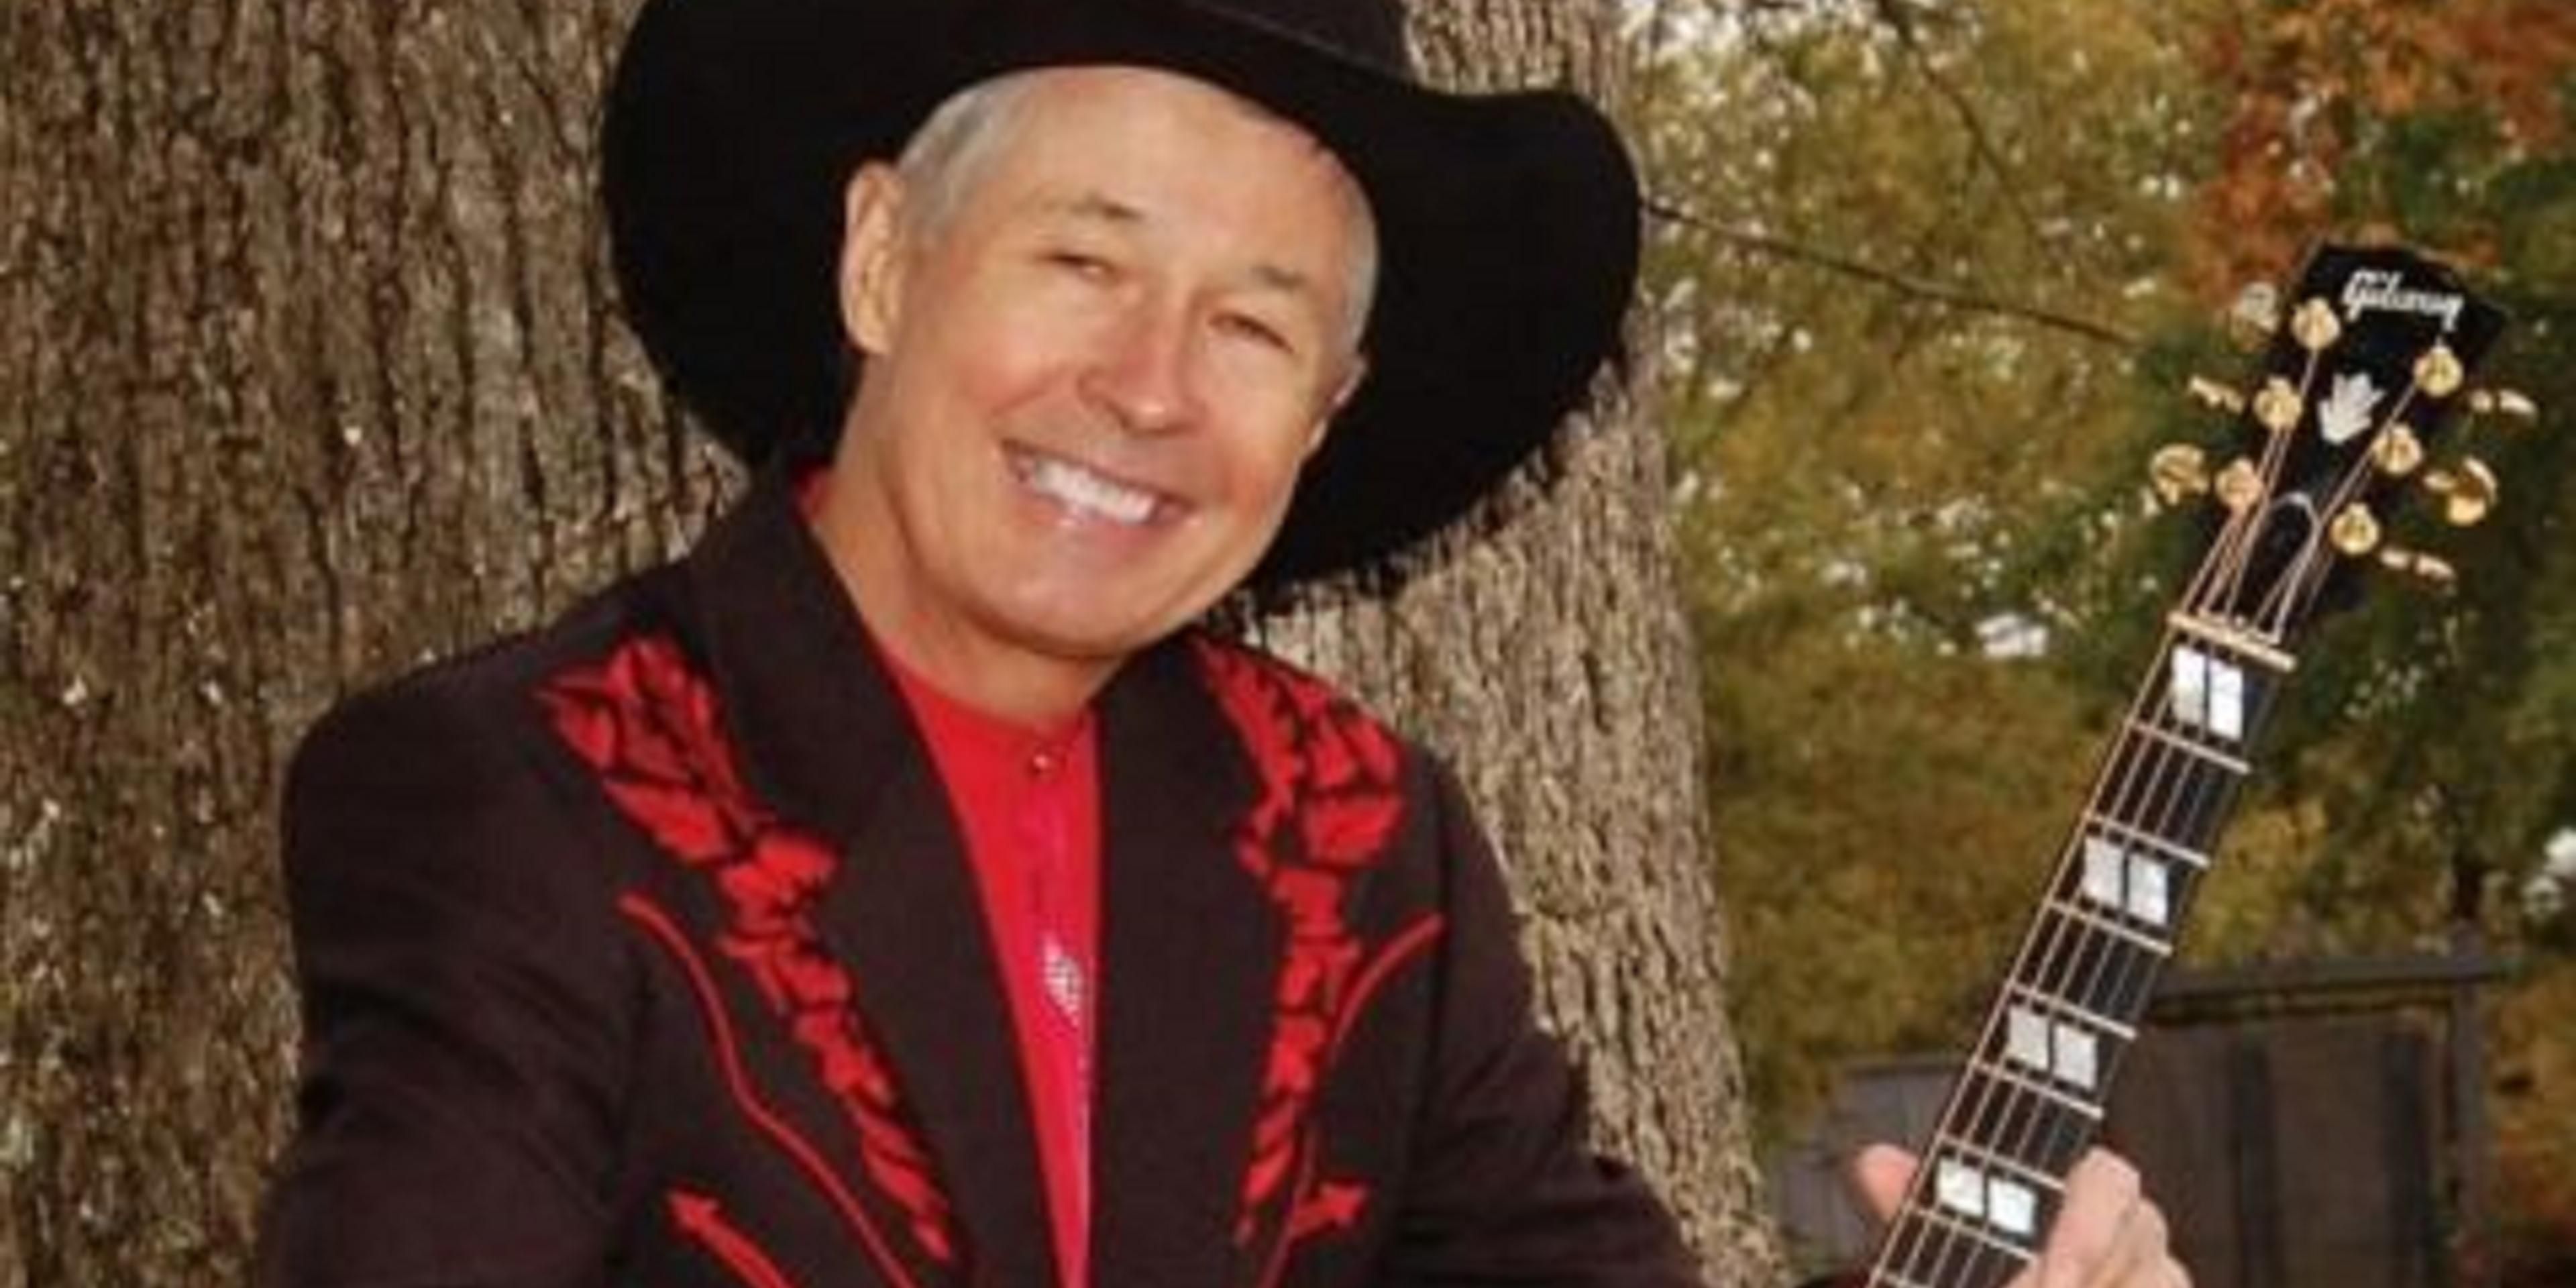 Leroy New - A Tribute to Marty Robbins and Classic County.    Hear great classic songs as Leroy honors the history of country music with songs by legendary country artists like Marty Robbins, Hank Williams, Johnny Cash and Bob Wills. And when Leroy New plays the guitar, it's even better! Plan your stay with us!